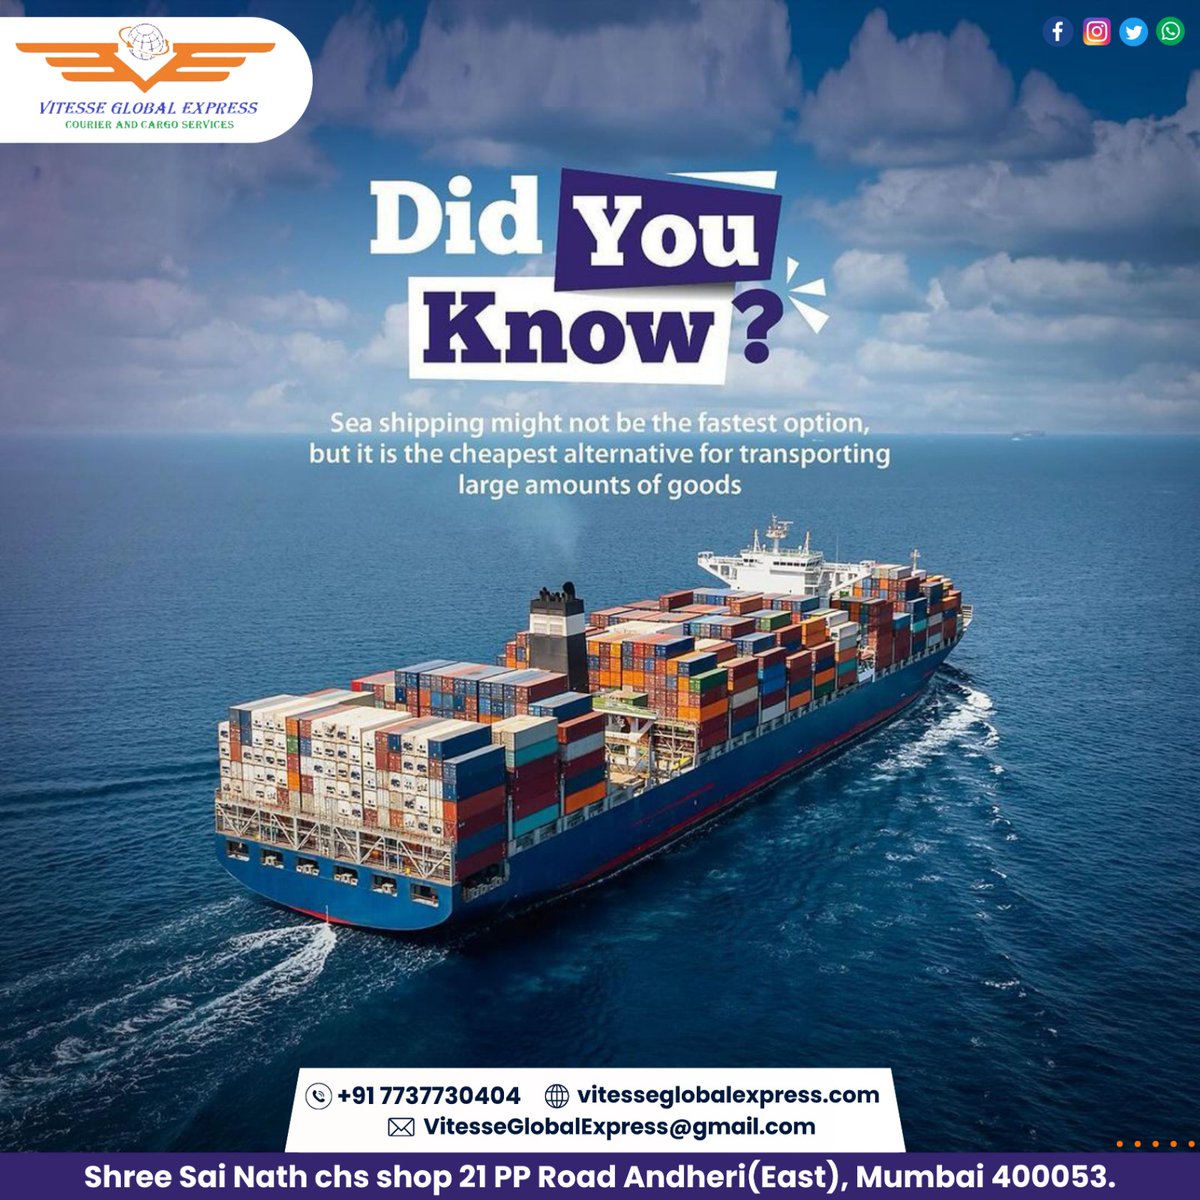 🌊 Did You Know? 🚢

Looking for a cost-effective way to transport large quantities of goods? Look no further! 
Contact us today at +917737730404 or visit vitesseglobalexpress.com 
🌐 #SeaShipping #Logistics #AffordableTransportation